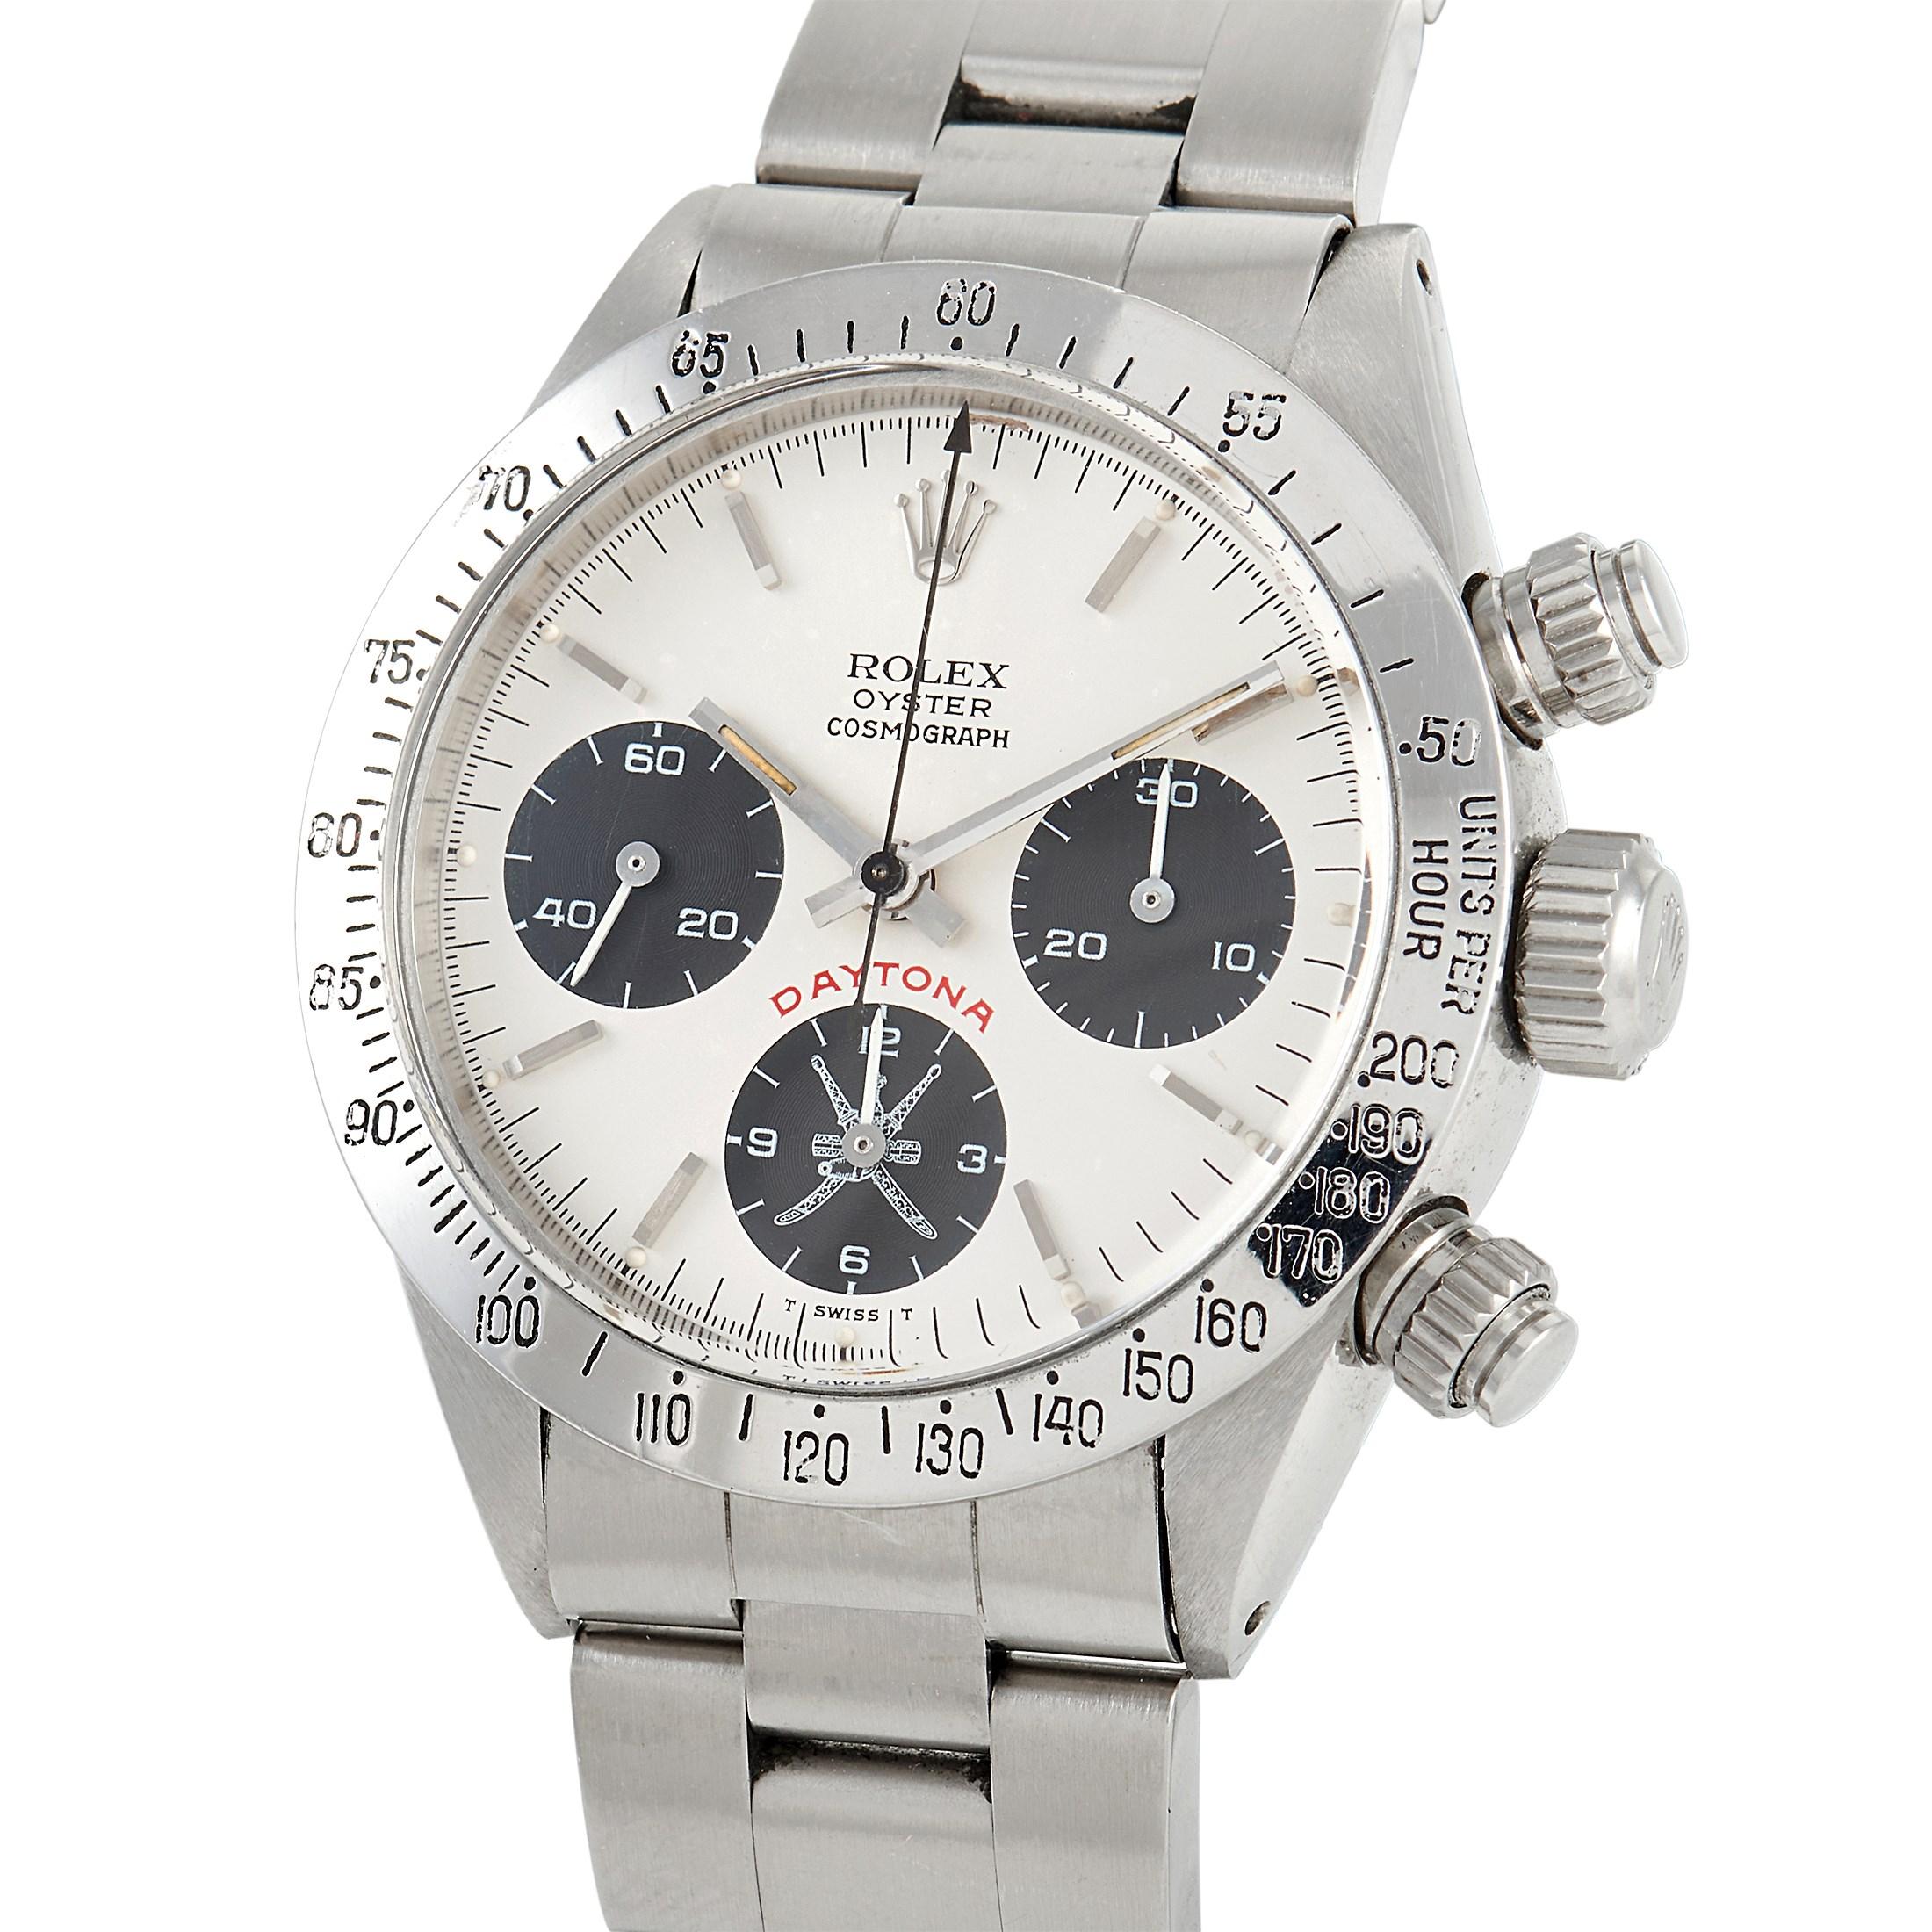 The Rolex Big Red Daytona Chronograph Watch, reference number 6265, is a vintage timpiece that proves exceptional luxury never goes out of style. 

Clean and classic, this timepiece pairs a 37mm stainless steel case with a bold white dial that comes